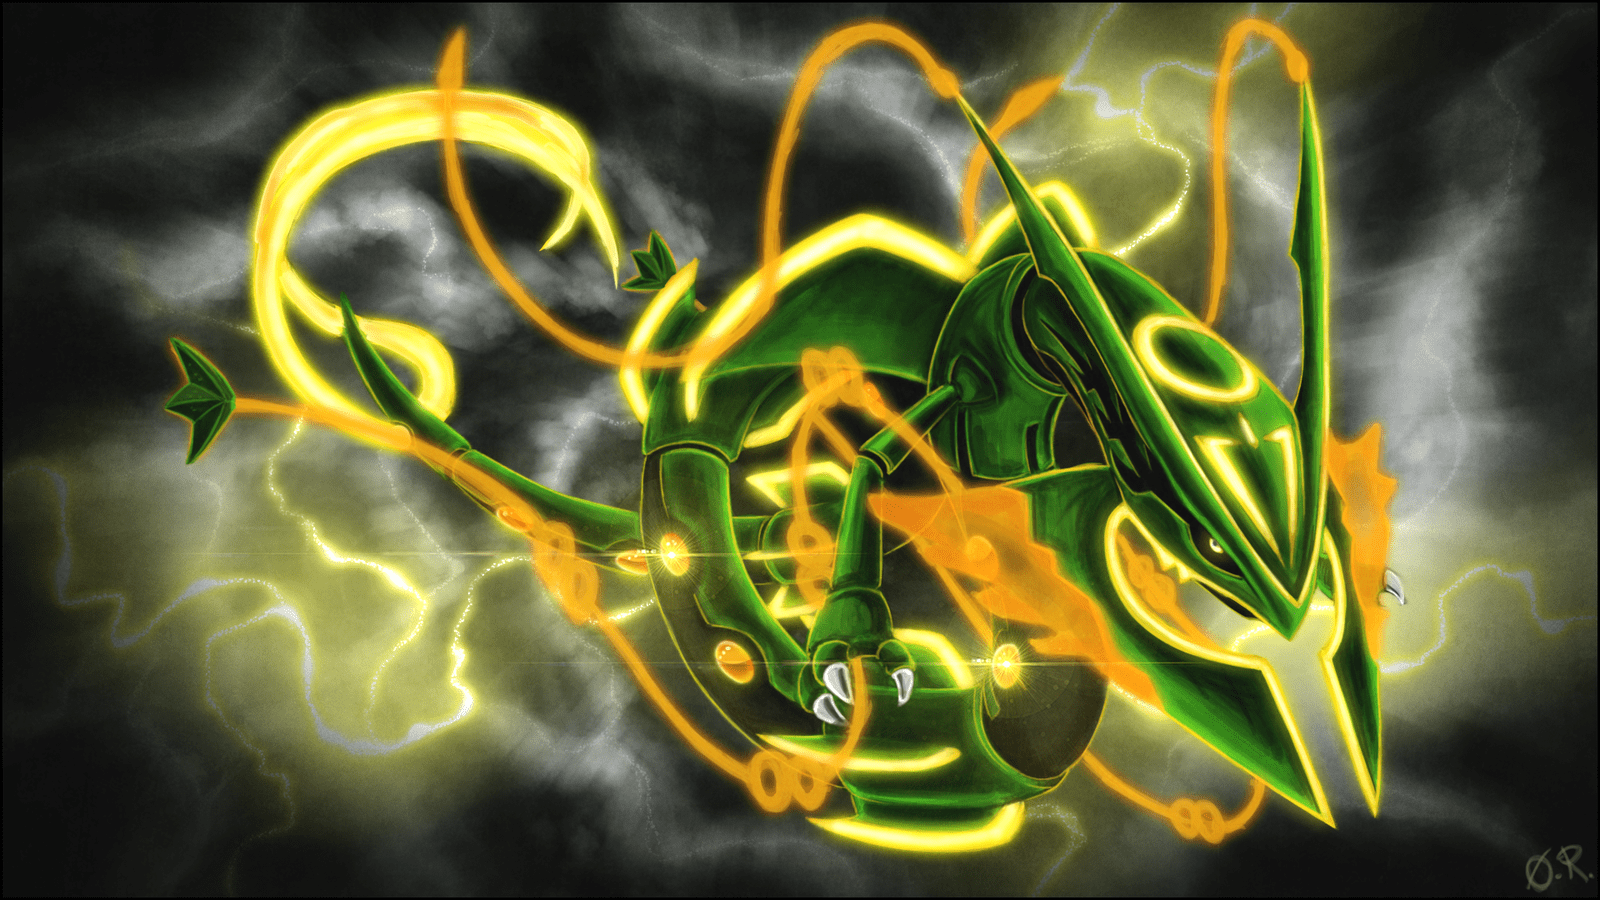 Shiny Rayquaza wallpaper by AUSTIZARD - Download on ZEDGE™